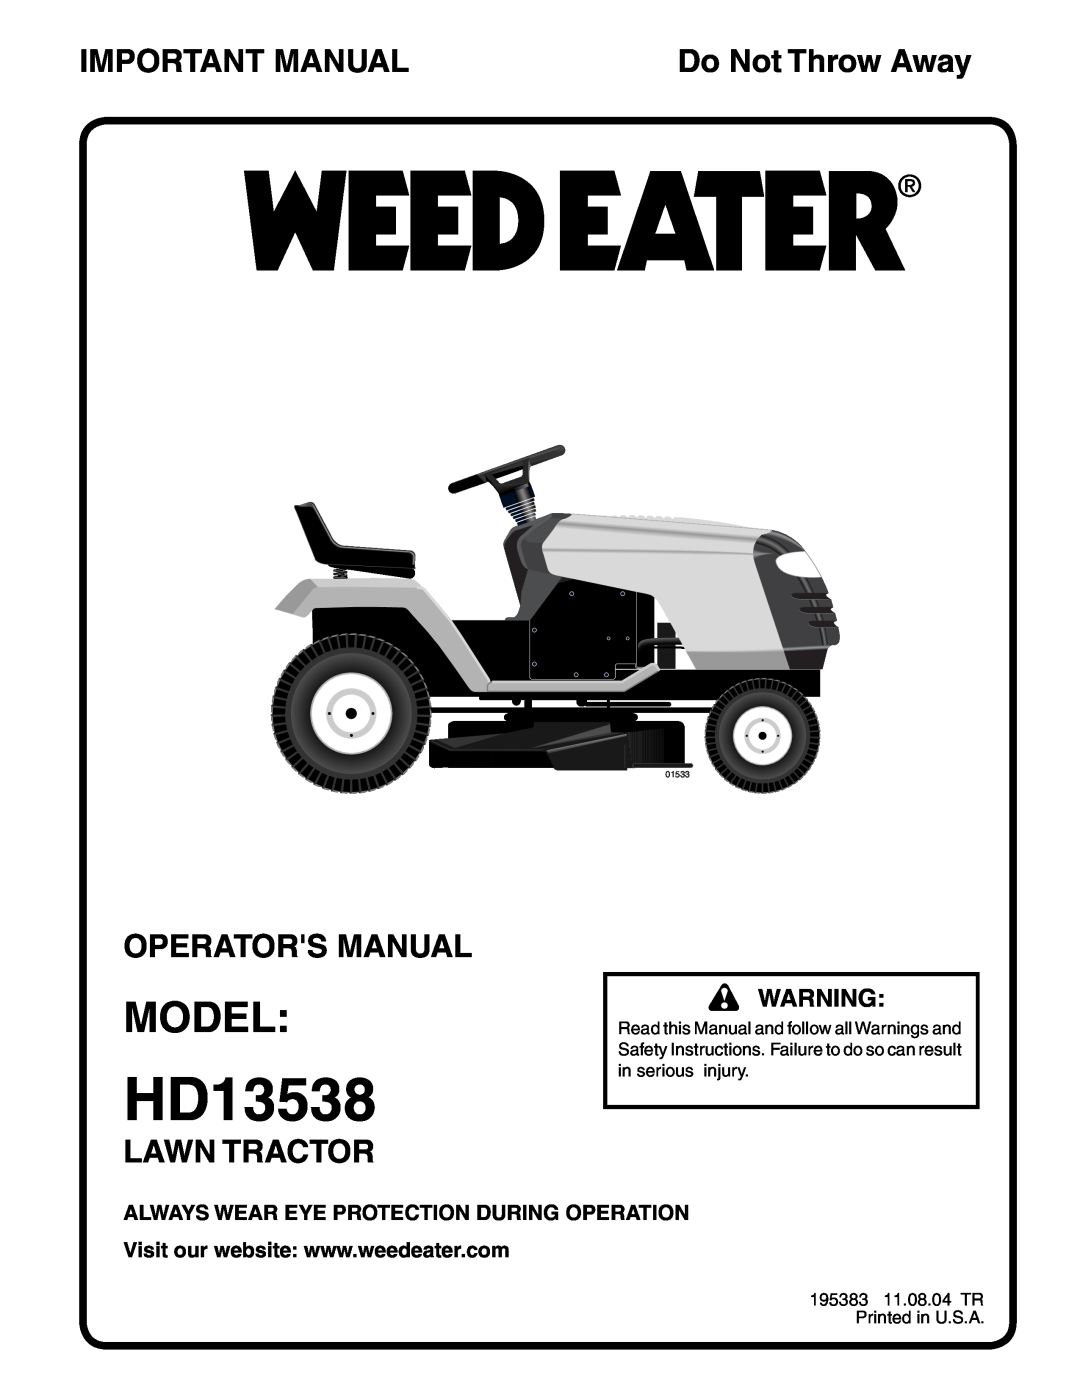 Weed Eater 195383 manual Model, Important Manual, Operators Manual, Lawn Tractor, HD13538, Do Not Throw Away, 01533 